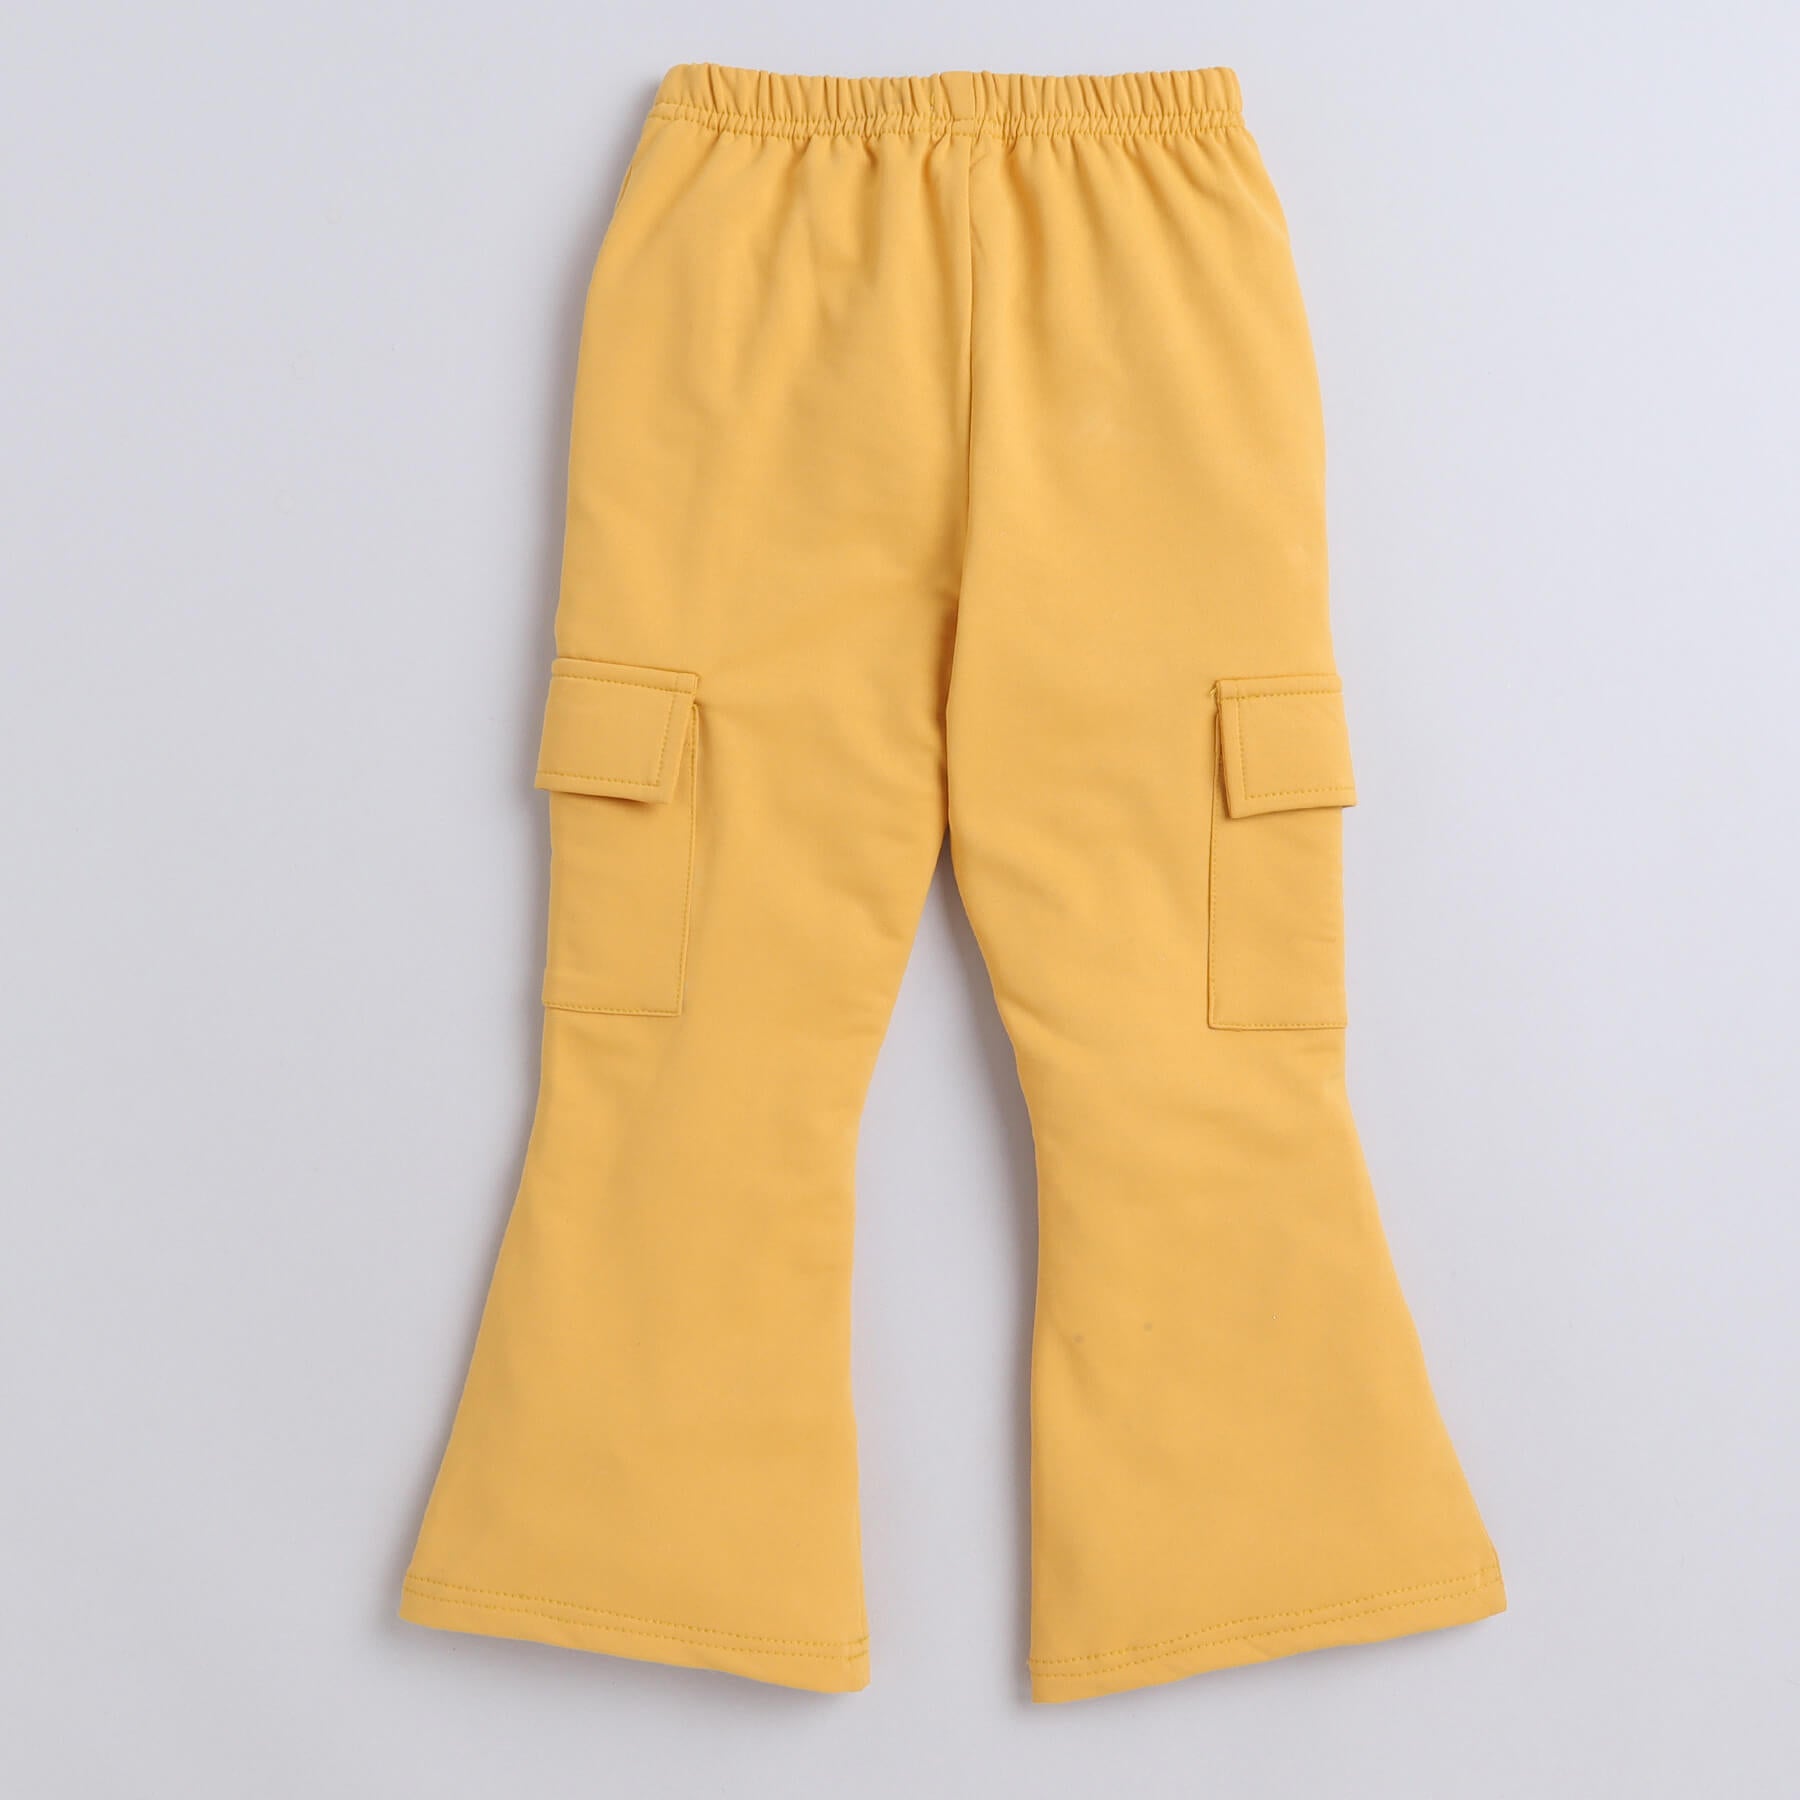 Shop One Shoulder Crop Top And Bell Bottom Pant Set-Yellow Online